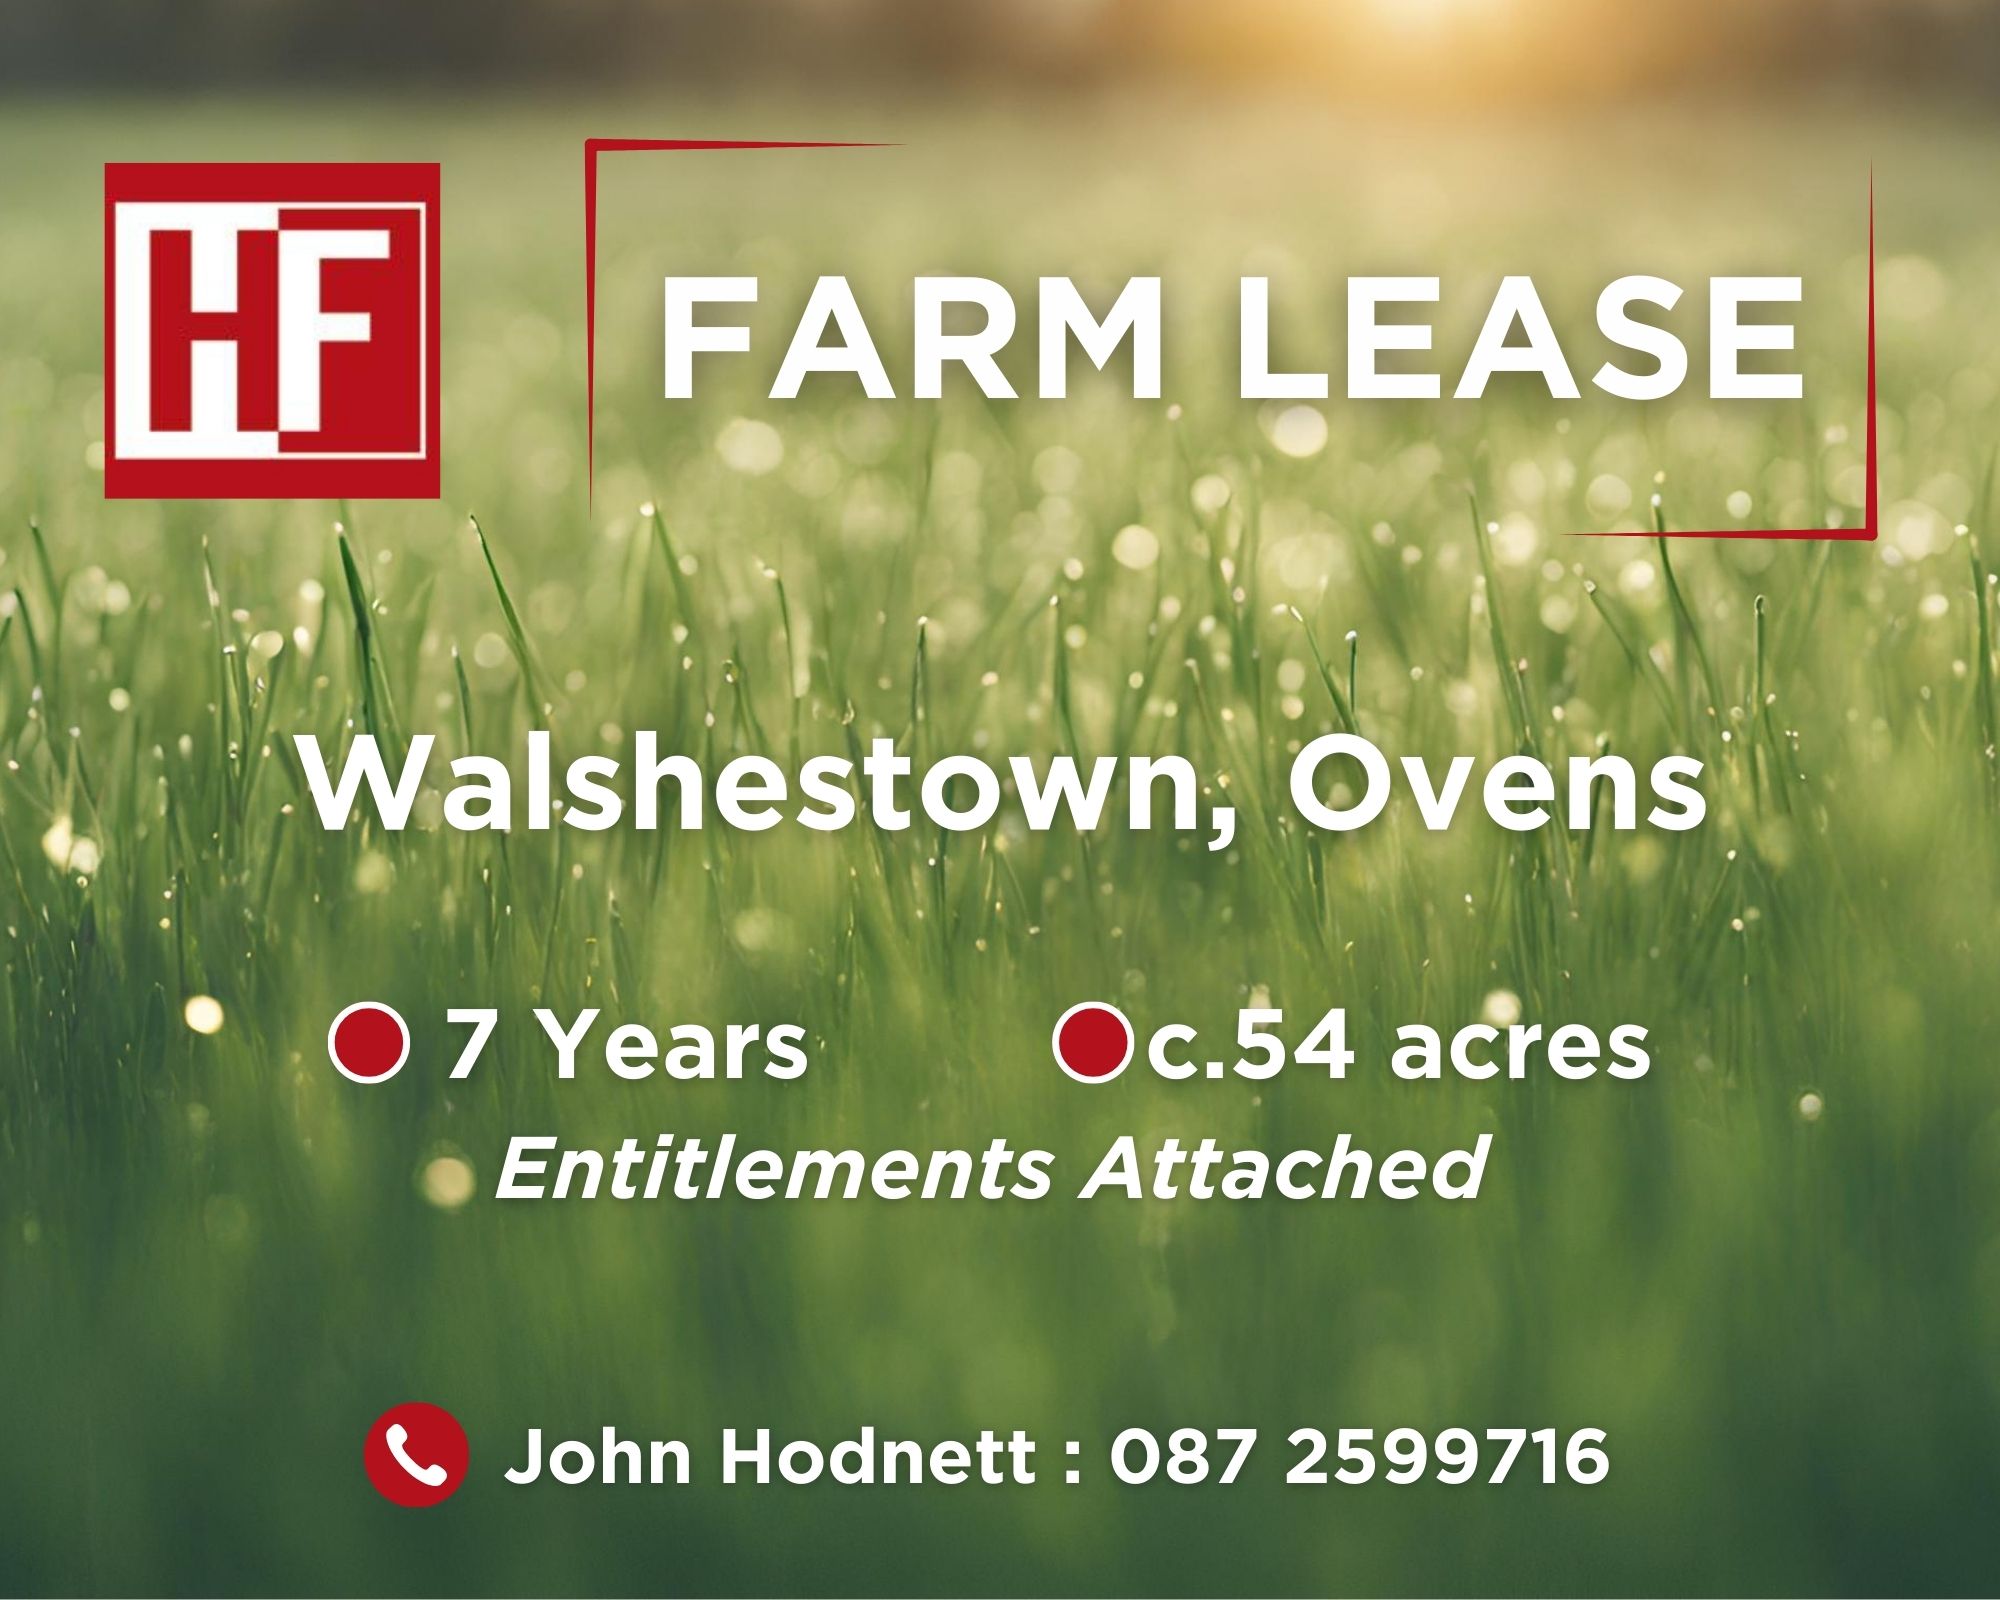 Farm Lease Walshestown, Ovens-revised